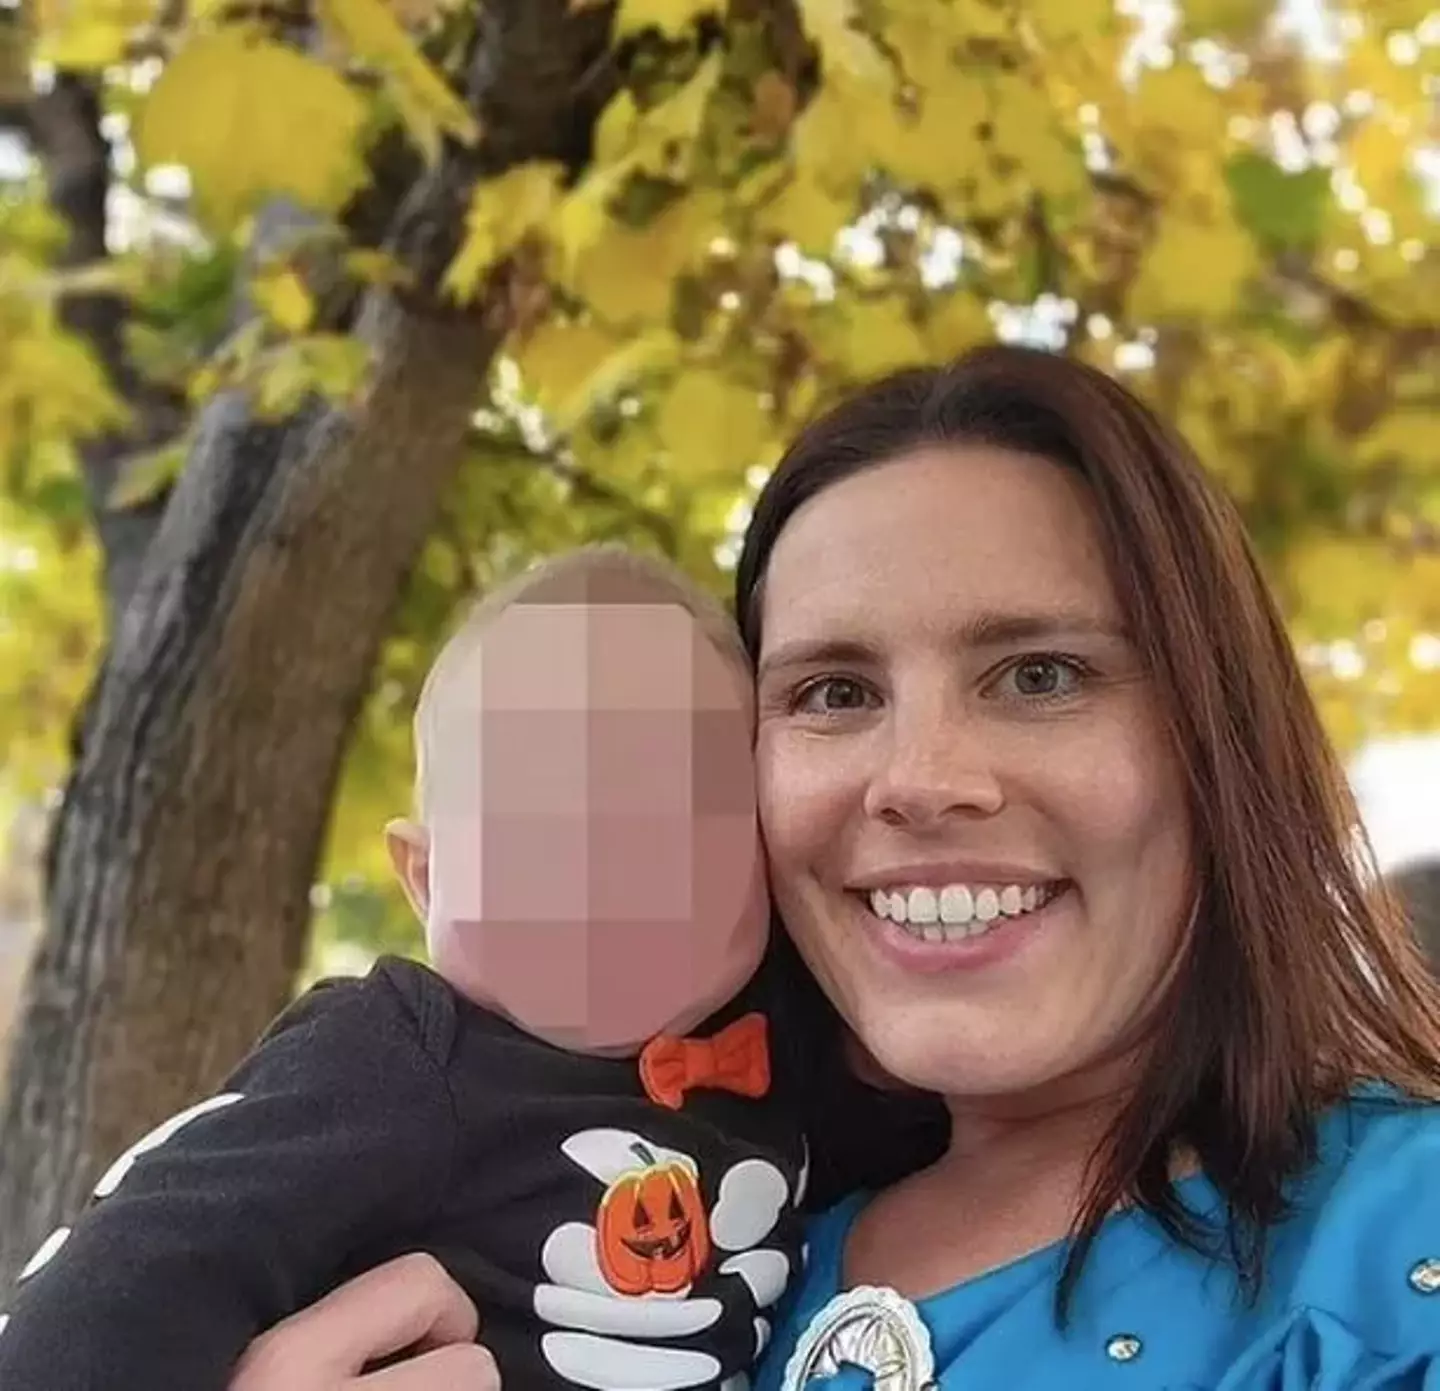 The couple's two-year-old was bitten in the face.